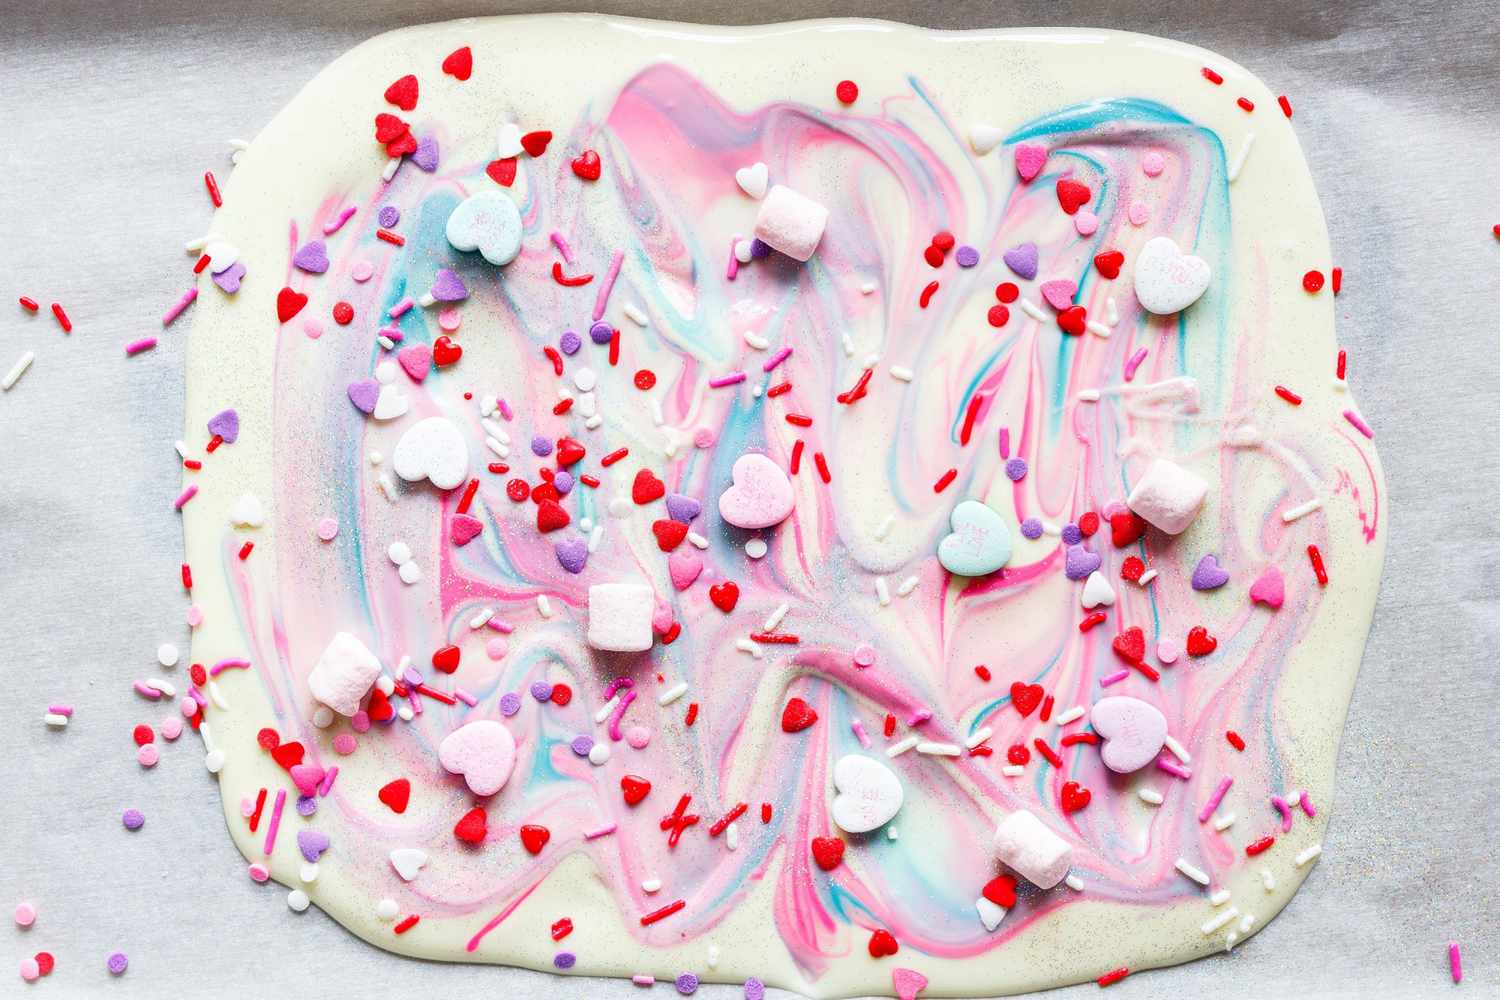 slab of unicorn bark - white chocolate topped with sprinkles and candy